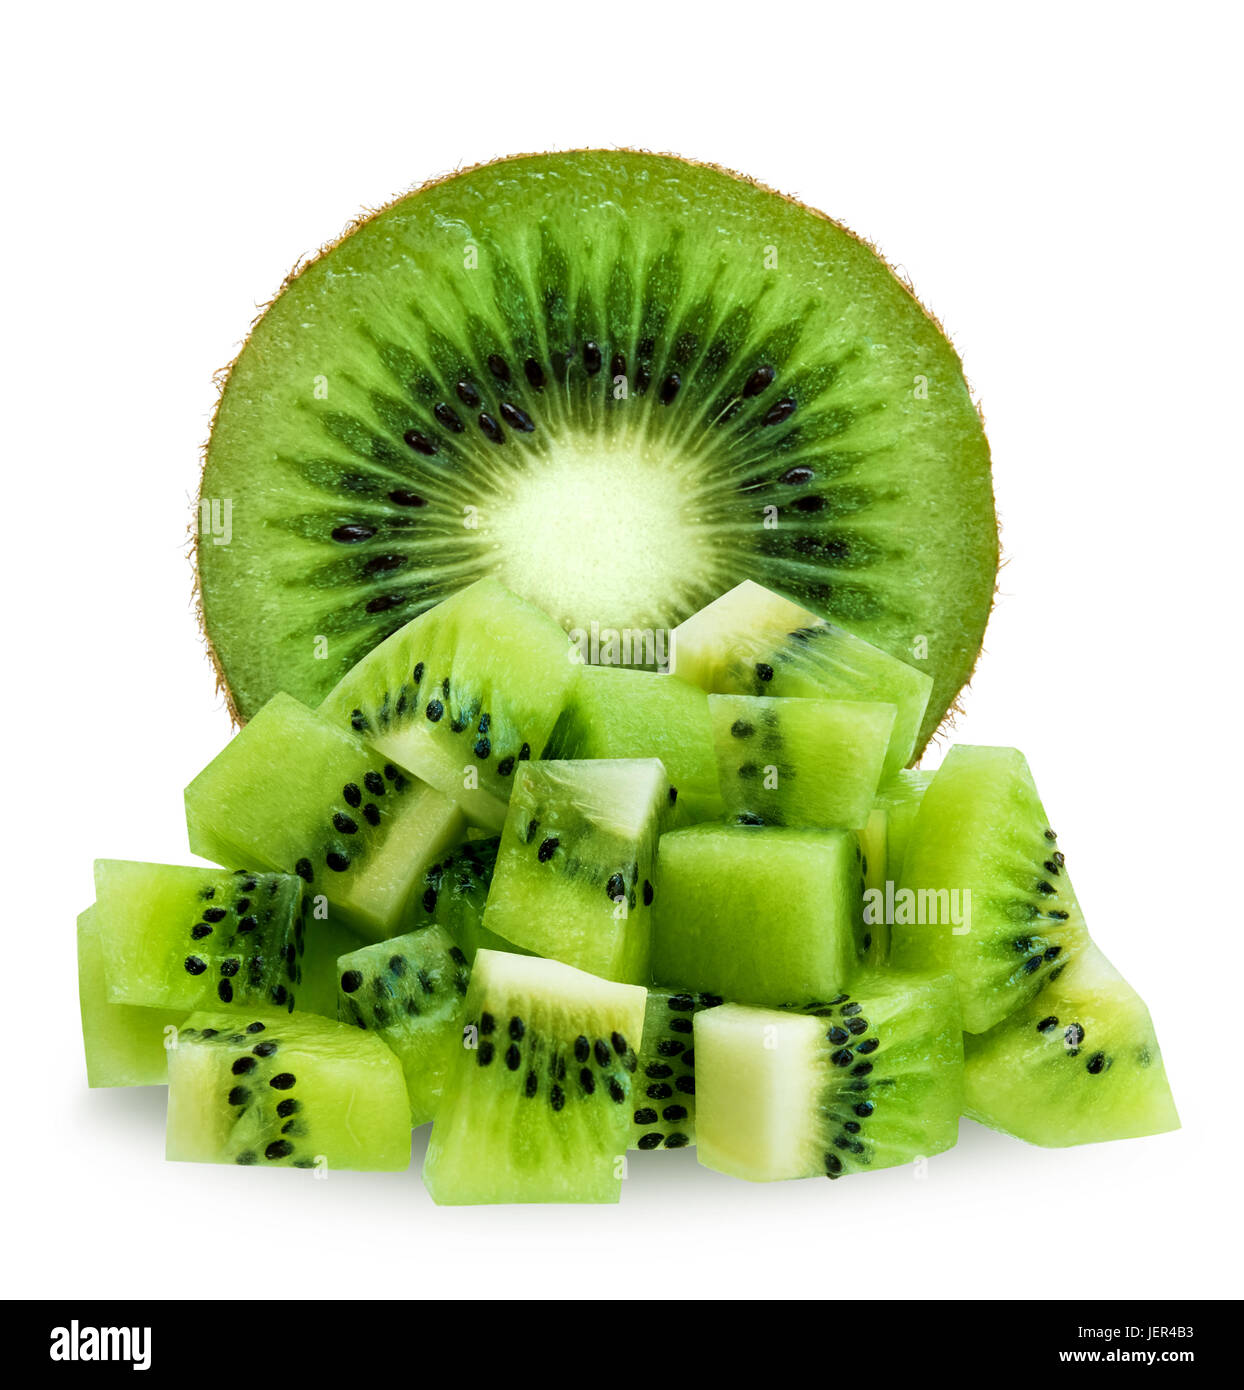 Half green fuzzy kiwifruit and diced isolated over white Stock Photo